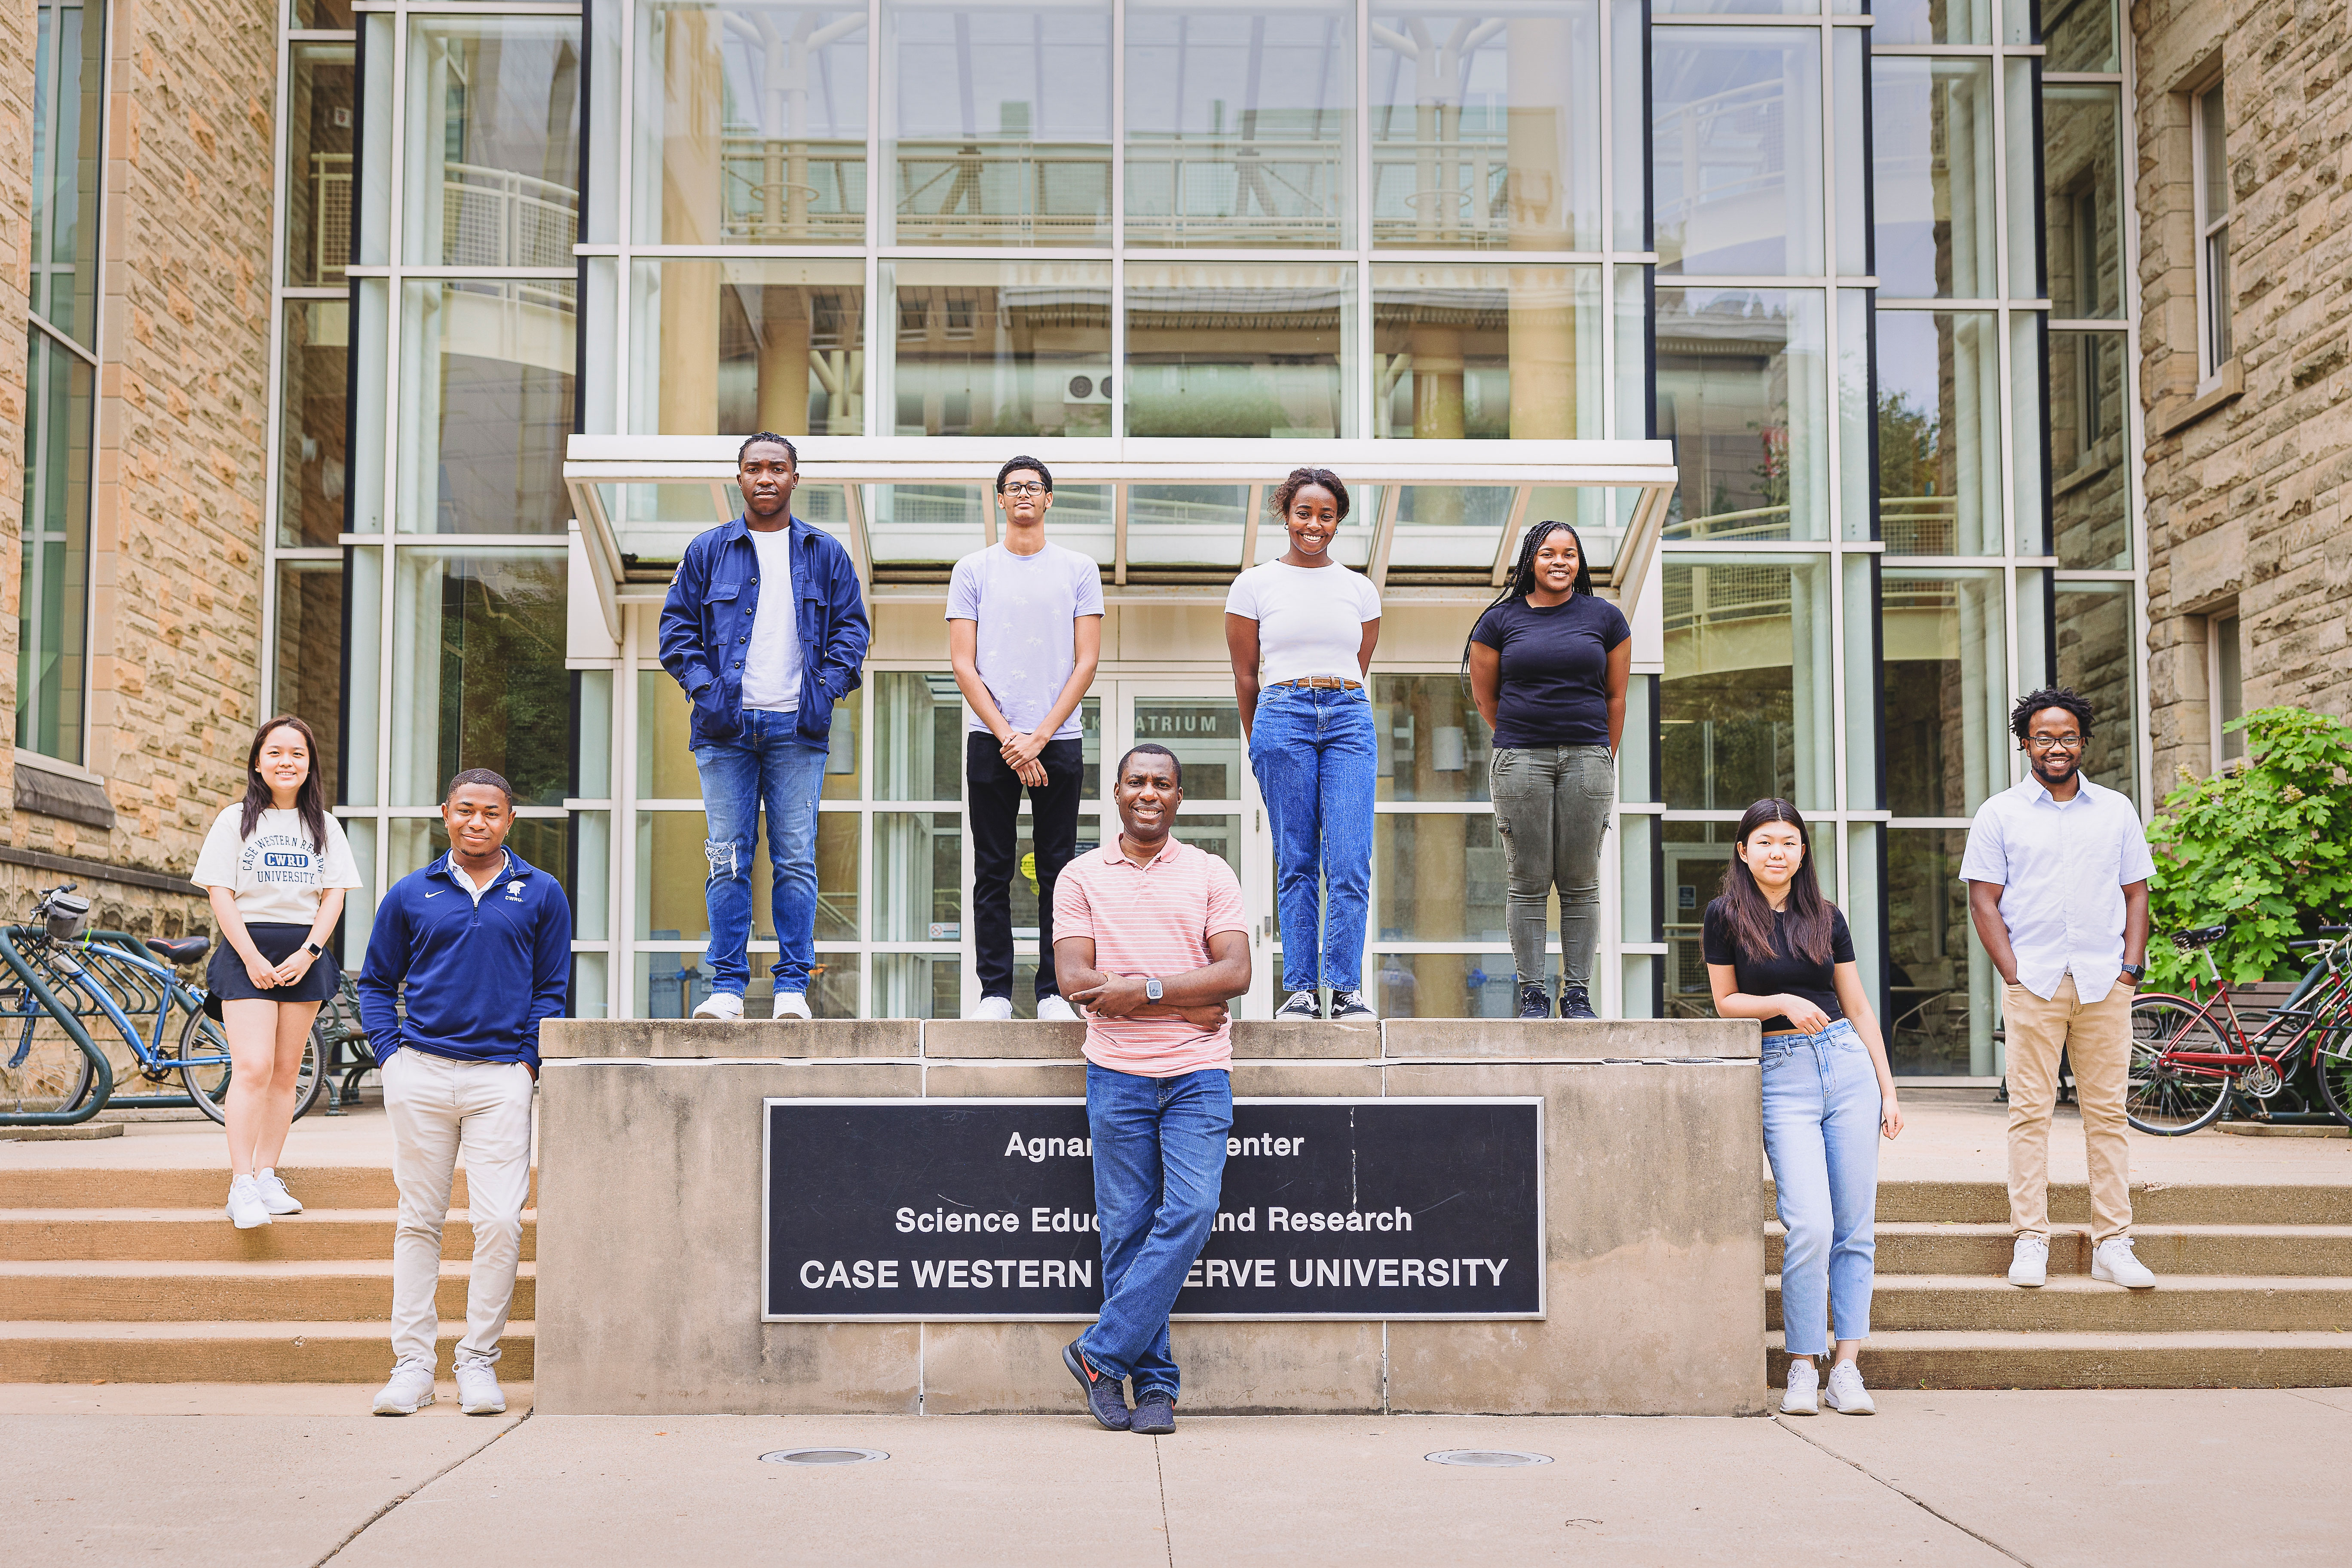 Nine students stand in front of the Agnar Pytts Center for Science Education and Research